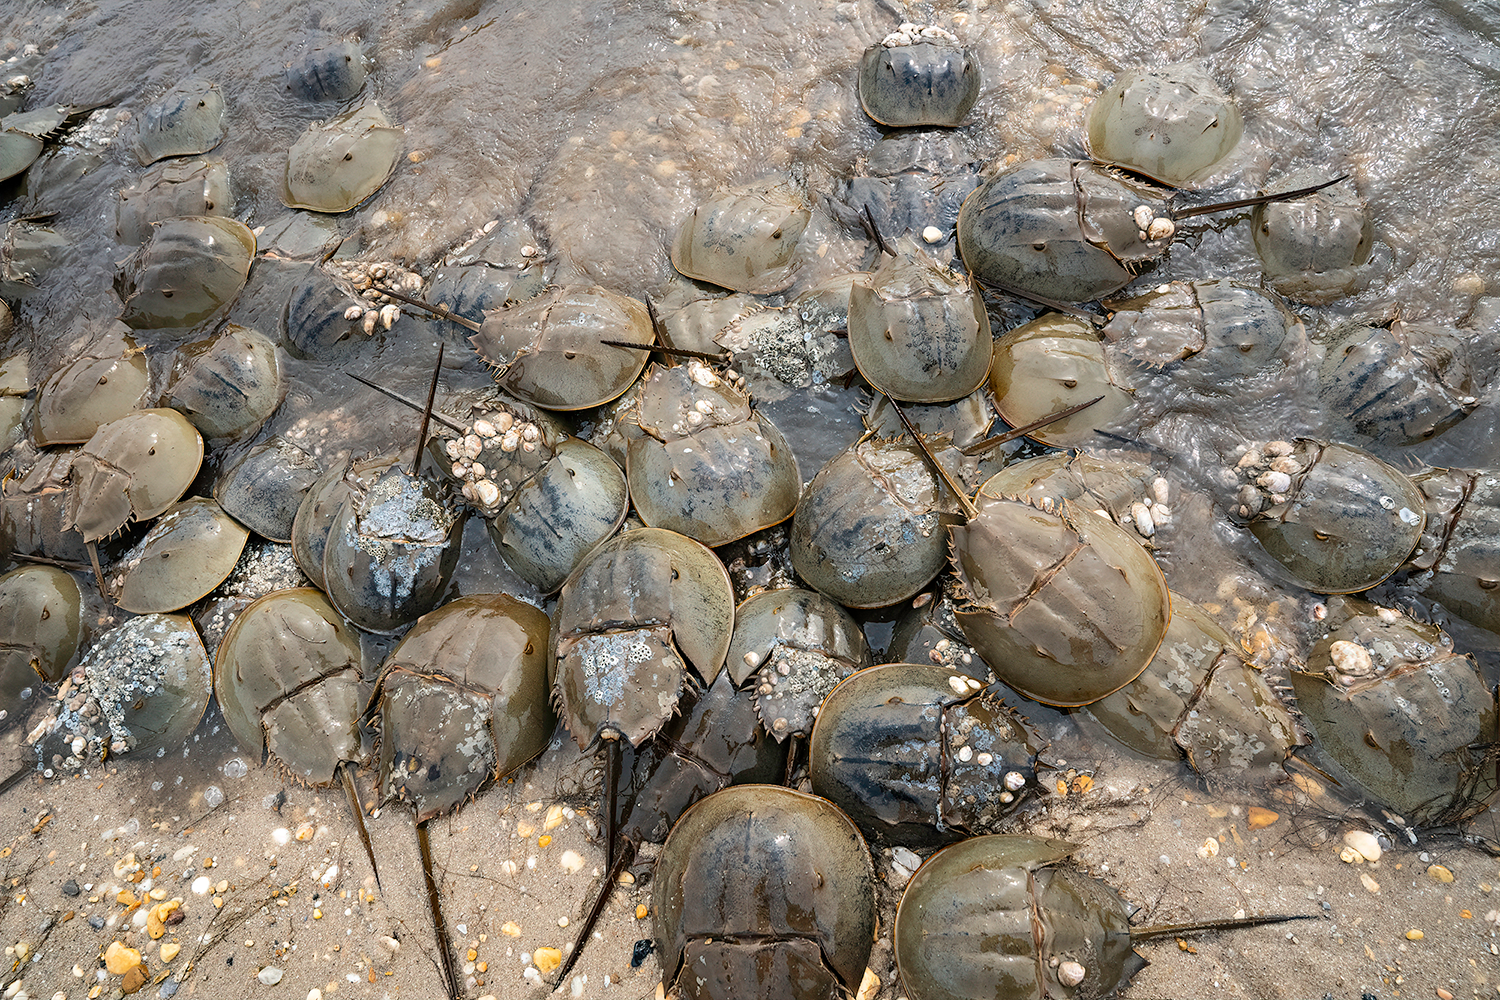 A large group of horseshoe crabs pile on top of eachother in shallow water.